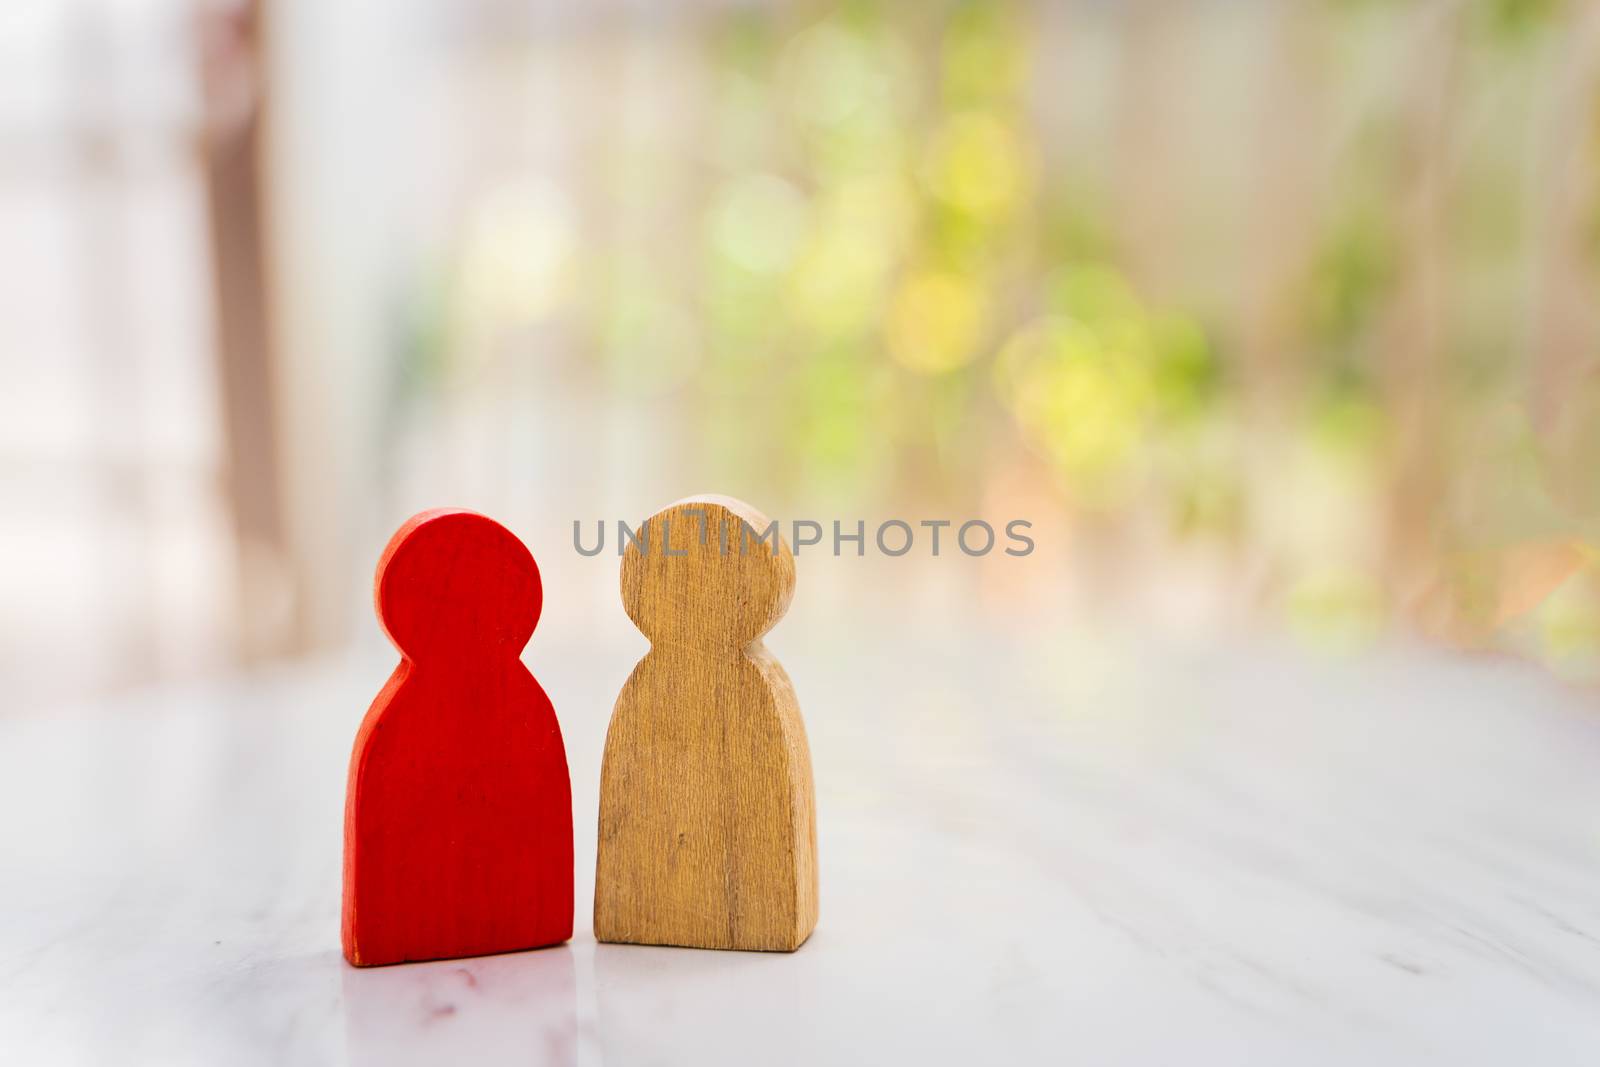 Figure in human resource management concept. The group of wooden puppets A red wooden figure like an dominant in a group with blur bokeh background
